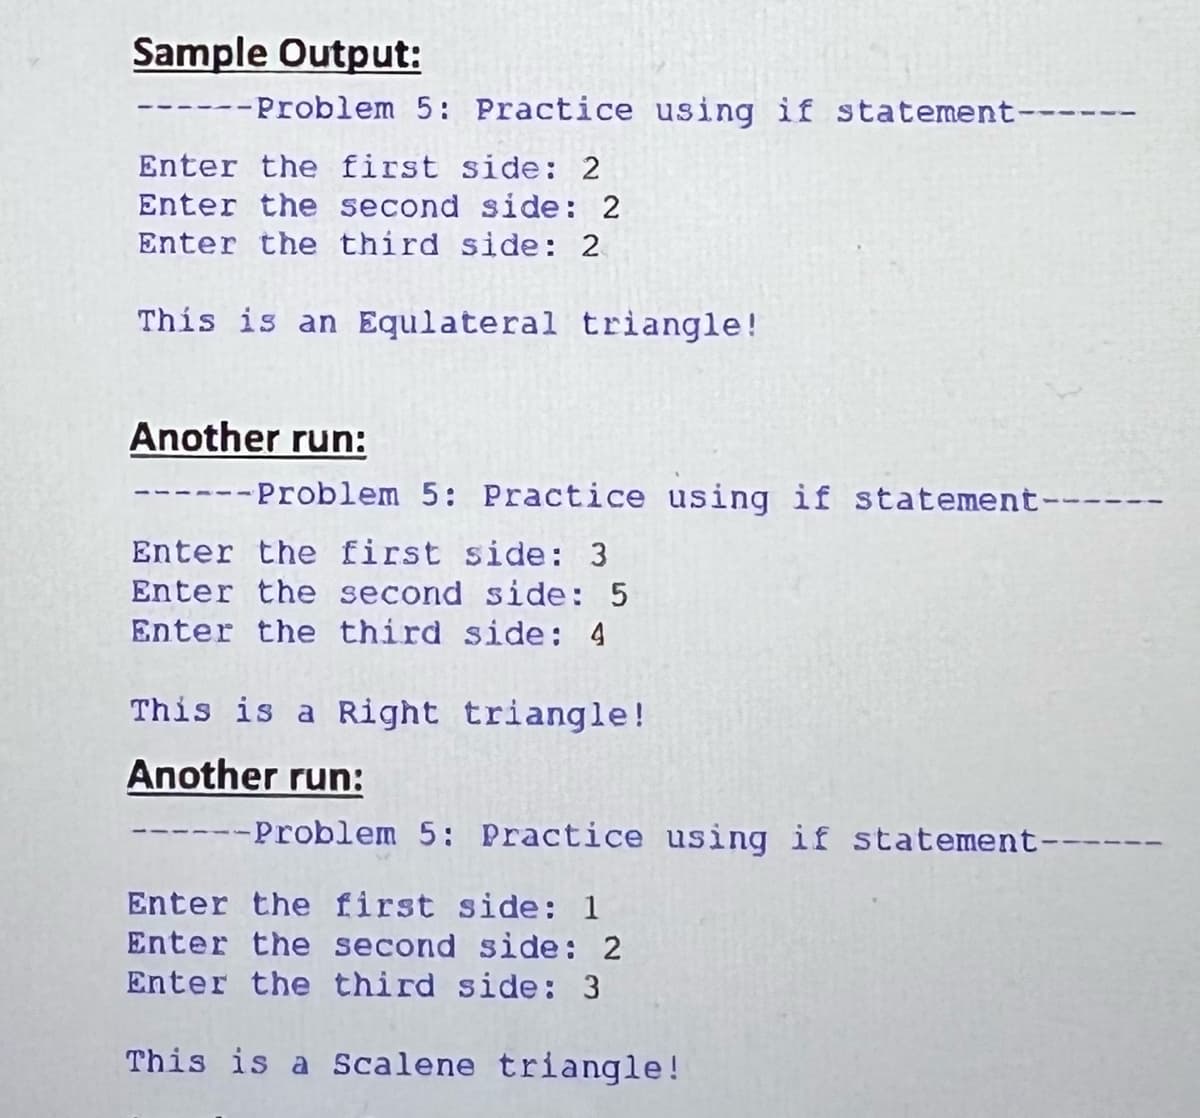 Sample Output:
------Problem 5: Practice using if statement-
Enter the first side: 2
Enter the second side: 2
Enter the third side: 2
This is an Equlateral triangle!
Another run:
-Problem 5: Practice using if statement-
Enter the first side: 3
Enter the second side: 5
Enter the third side: 4
This is a Right triangle!
Another run:
--Problem 5: Practice using if statement-
Enter the first side: 1
Enter the second side: 2
Enter the third side: 3
This is a Scalene triangle!
